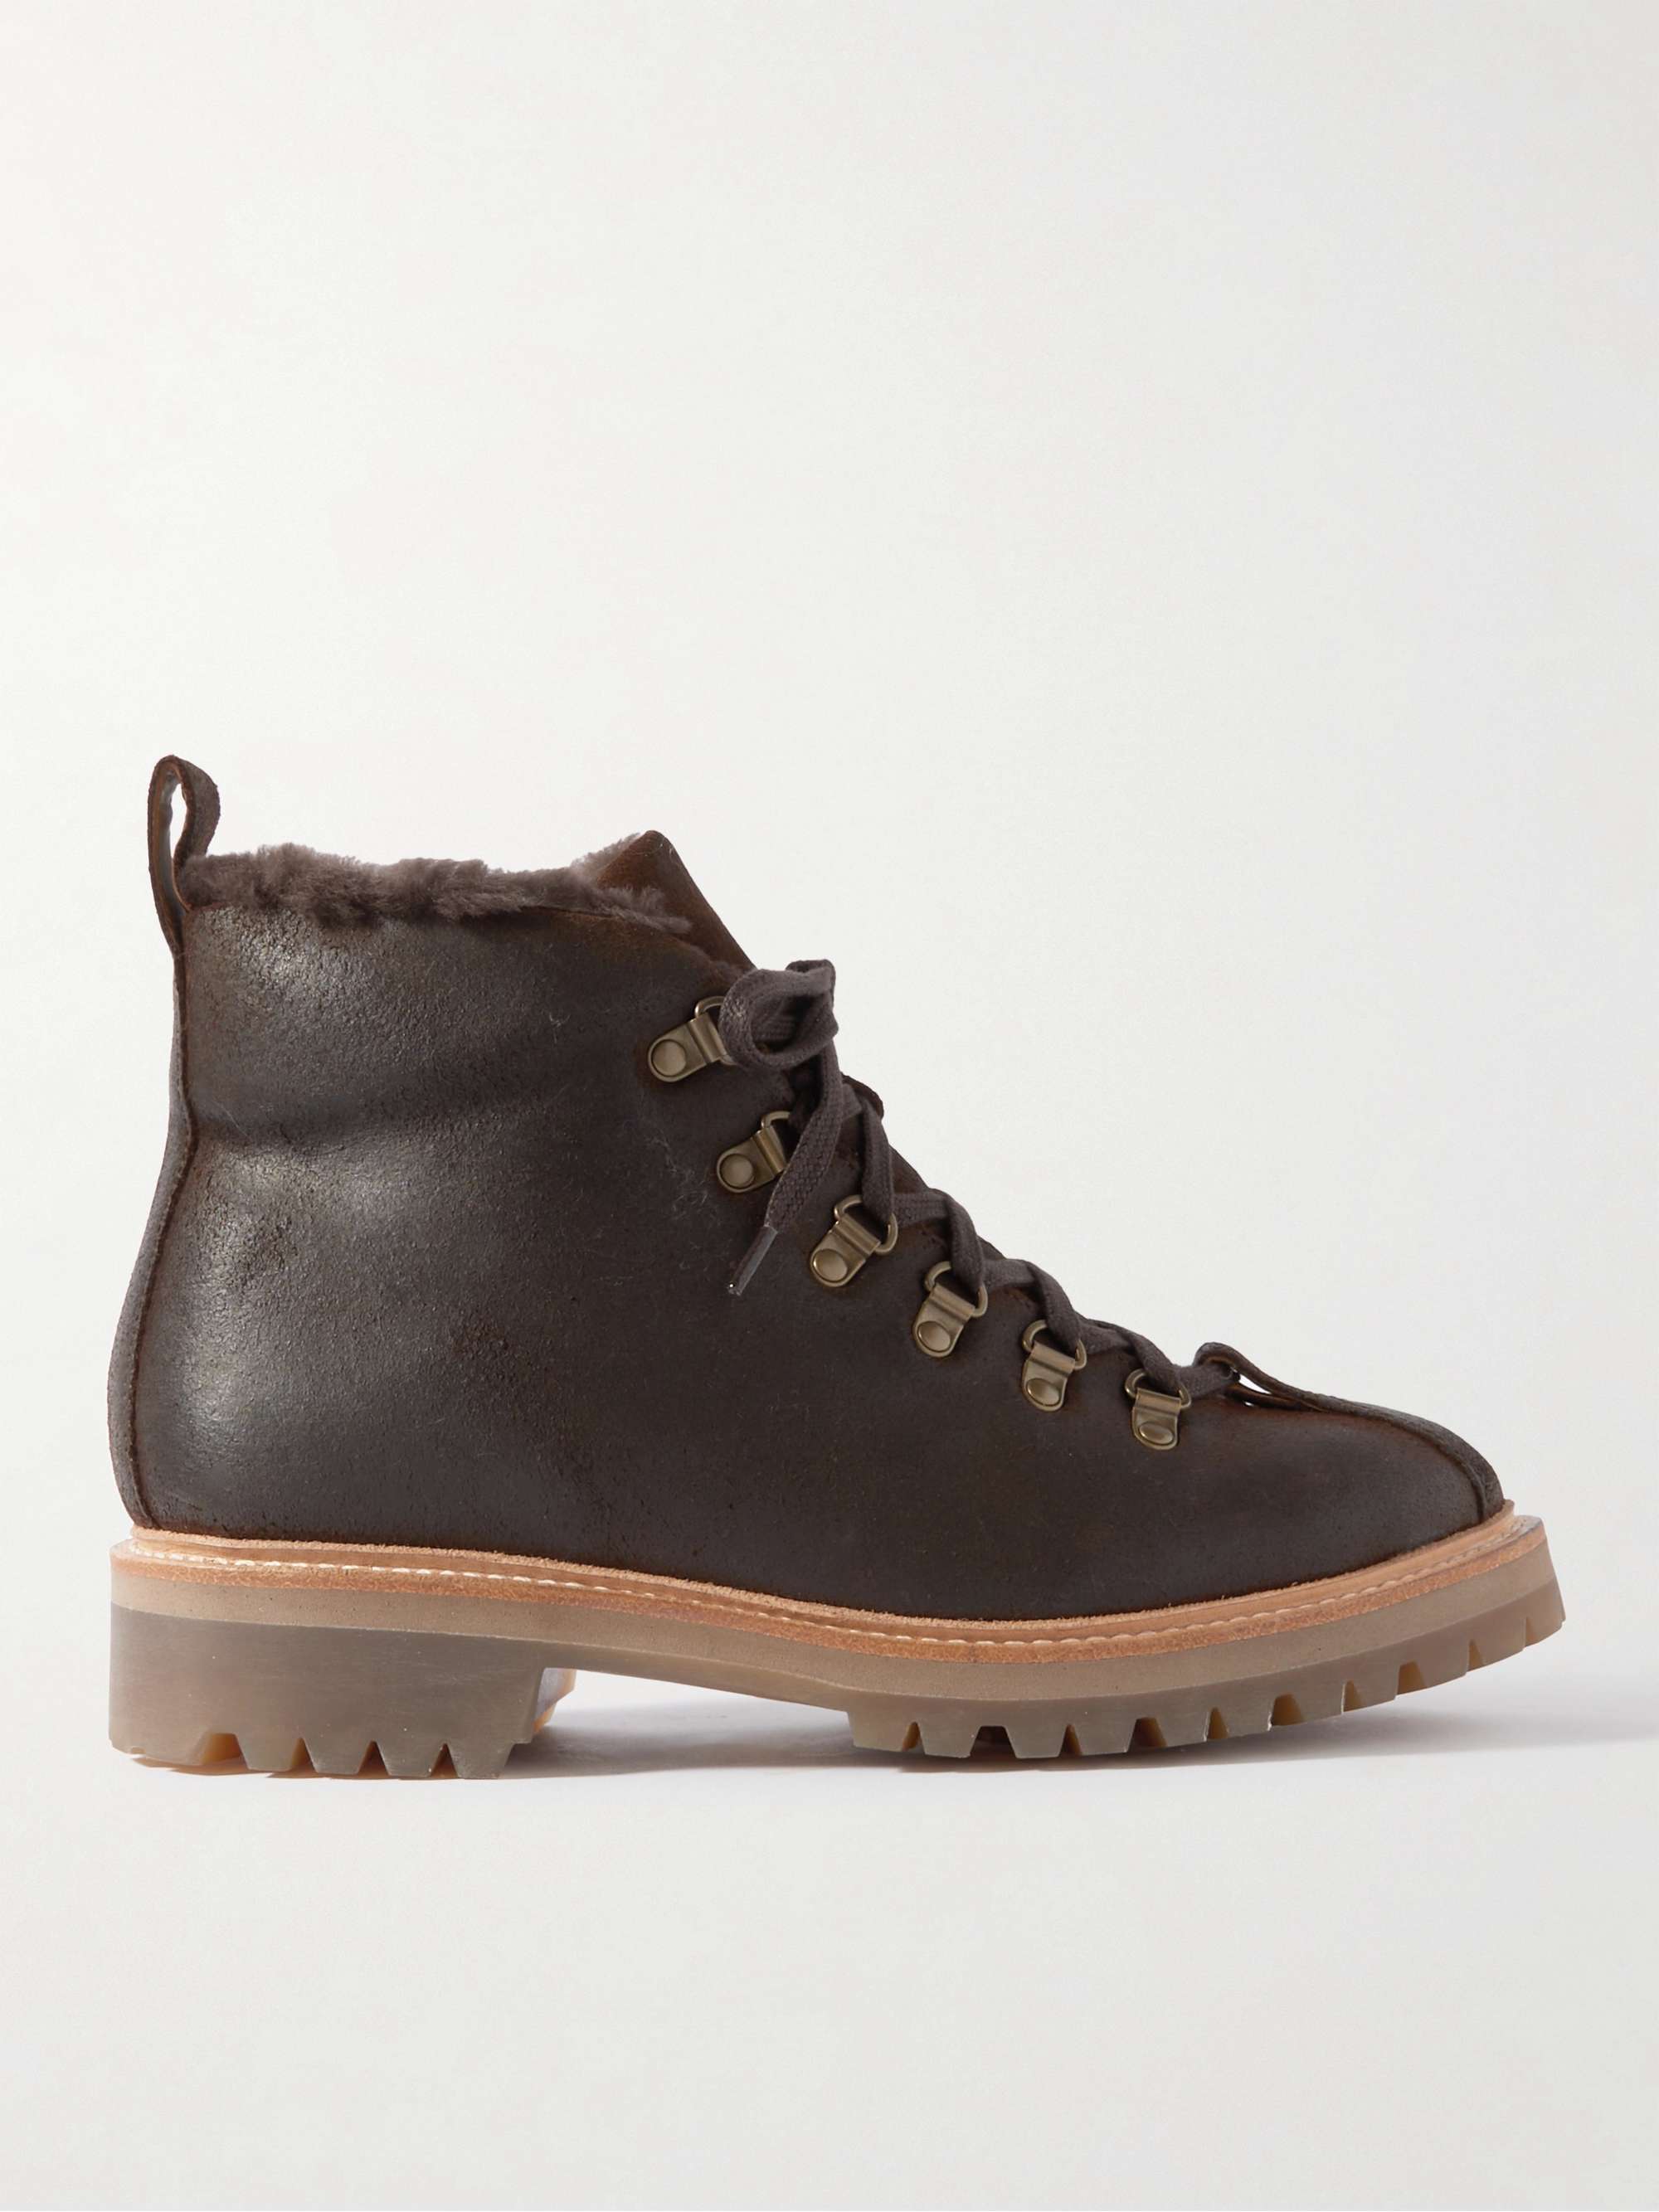 GRENSON Bobby Shearling-Lined Waxed-Leather Boots for Men | MR PORTER